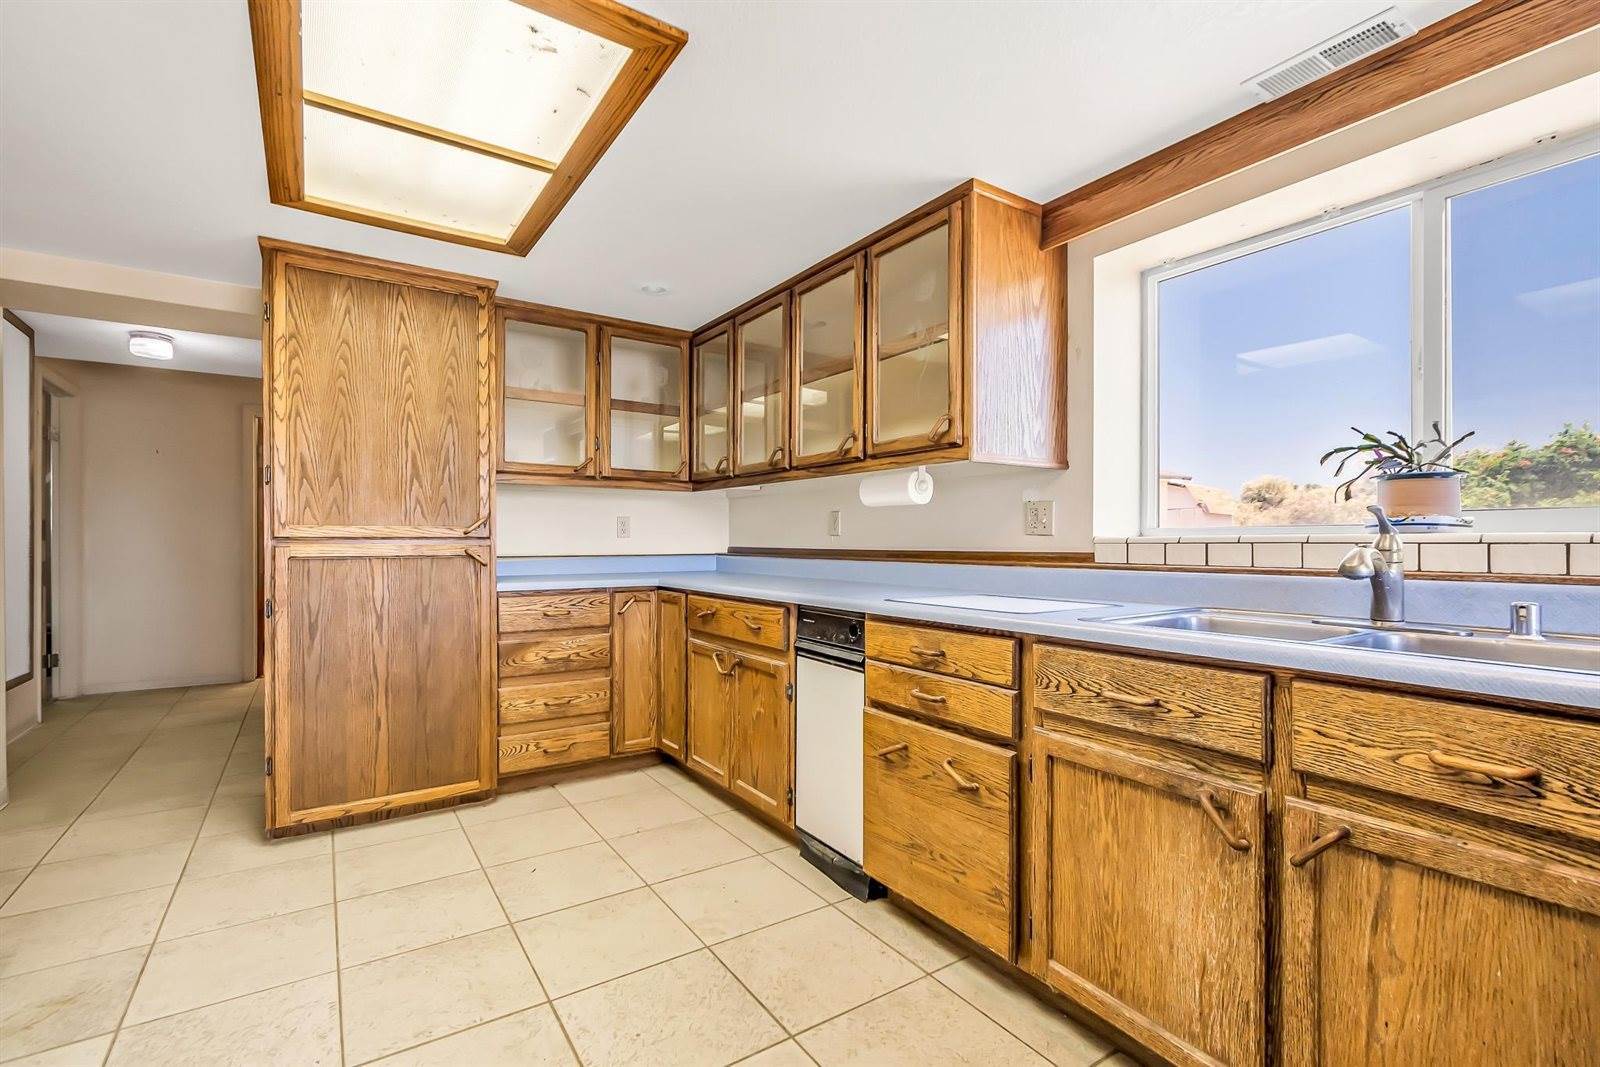 242 31 Road, Grand Junction, CO 81503